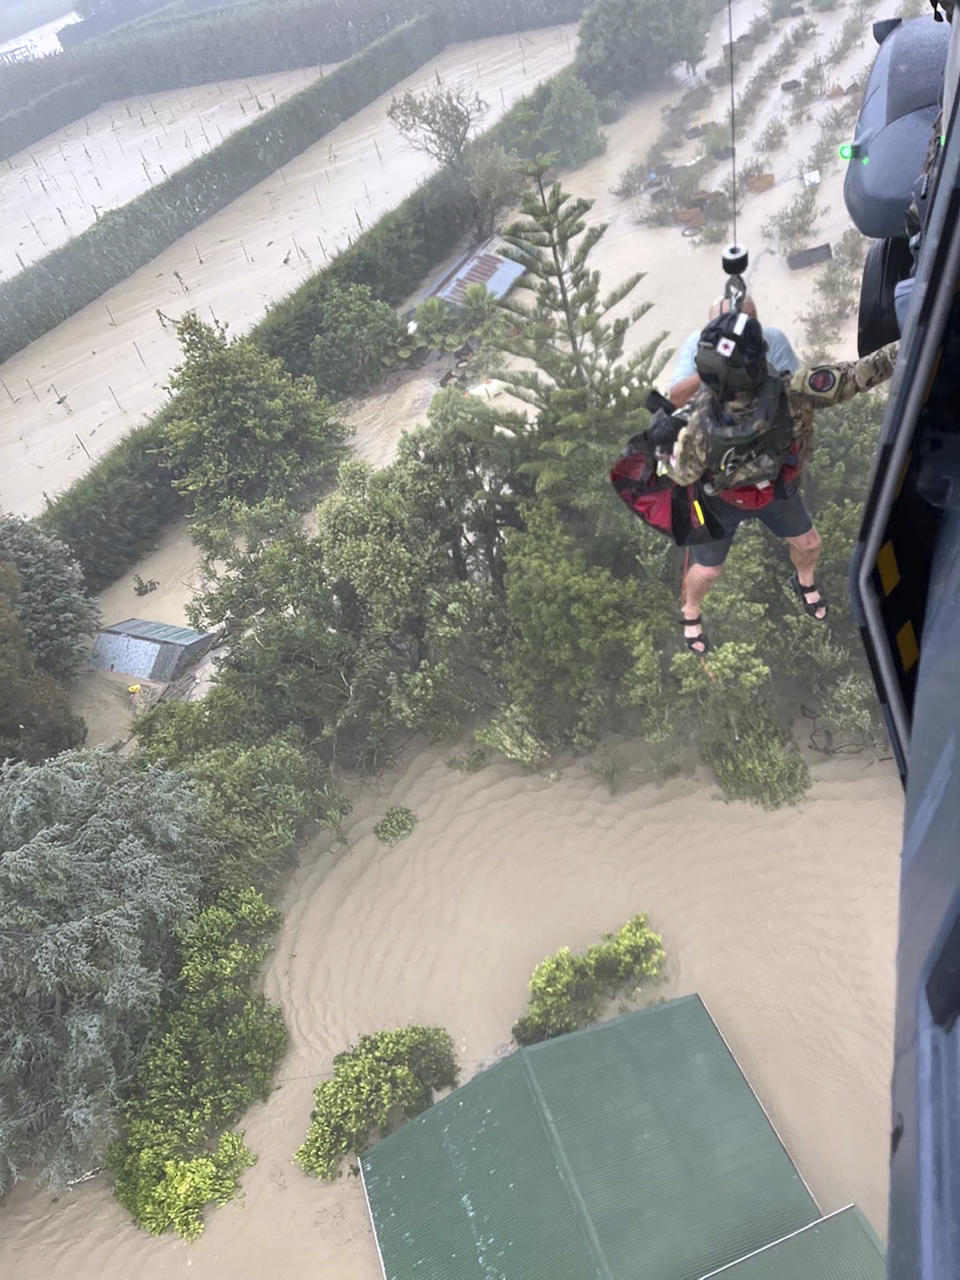 In this image released by the New Zealand Defense Force on Wednesday, Feb. 15, 2023, a person is winched from a rooftop of a home to safety by helicopter in the Esk Valley, near Napier, New Zealand. The New Zealand government declared a national state of emergency Tuesday after Cyclone Gabrielle battered the country's north in what officials described as the nation's most severe weather event in years. (New Zealand Defense Force via AP)